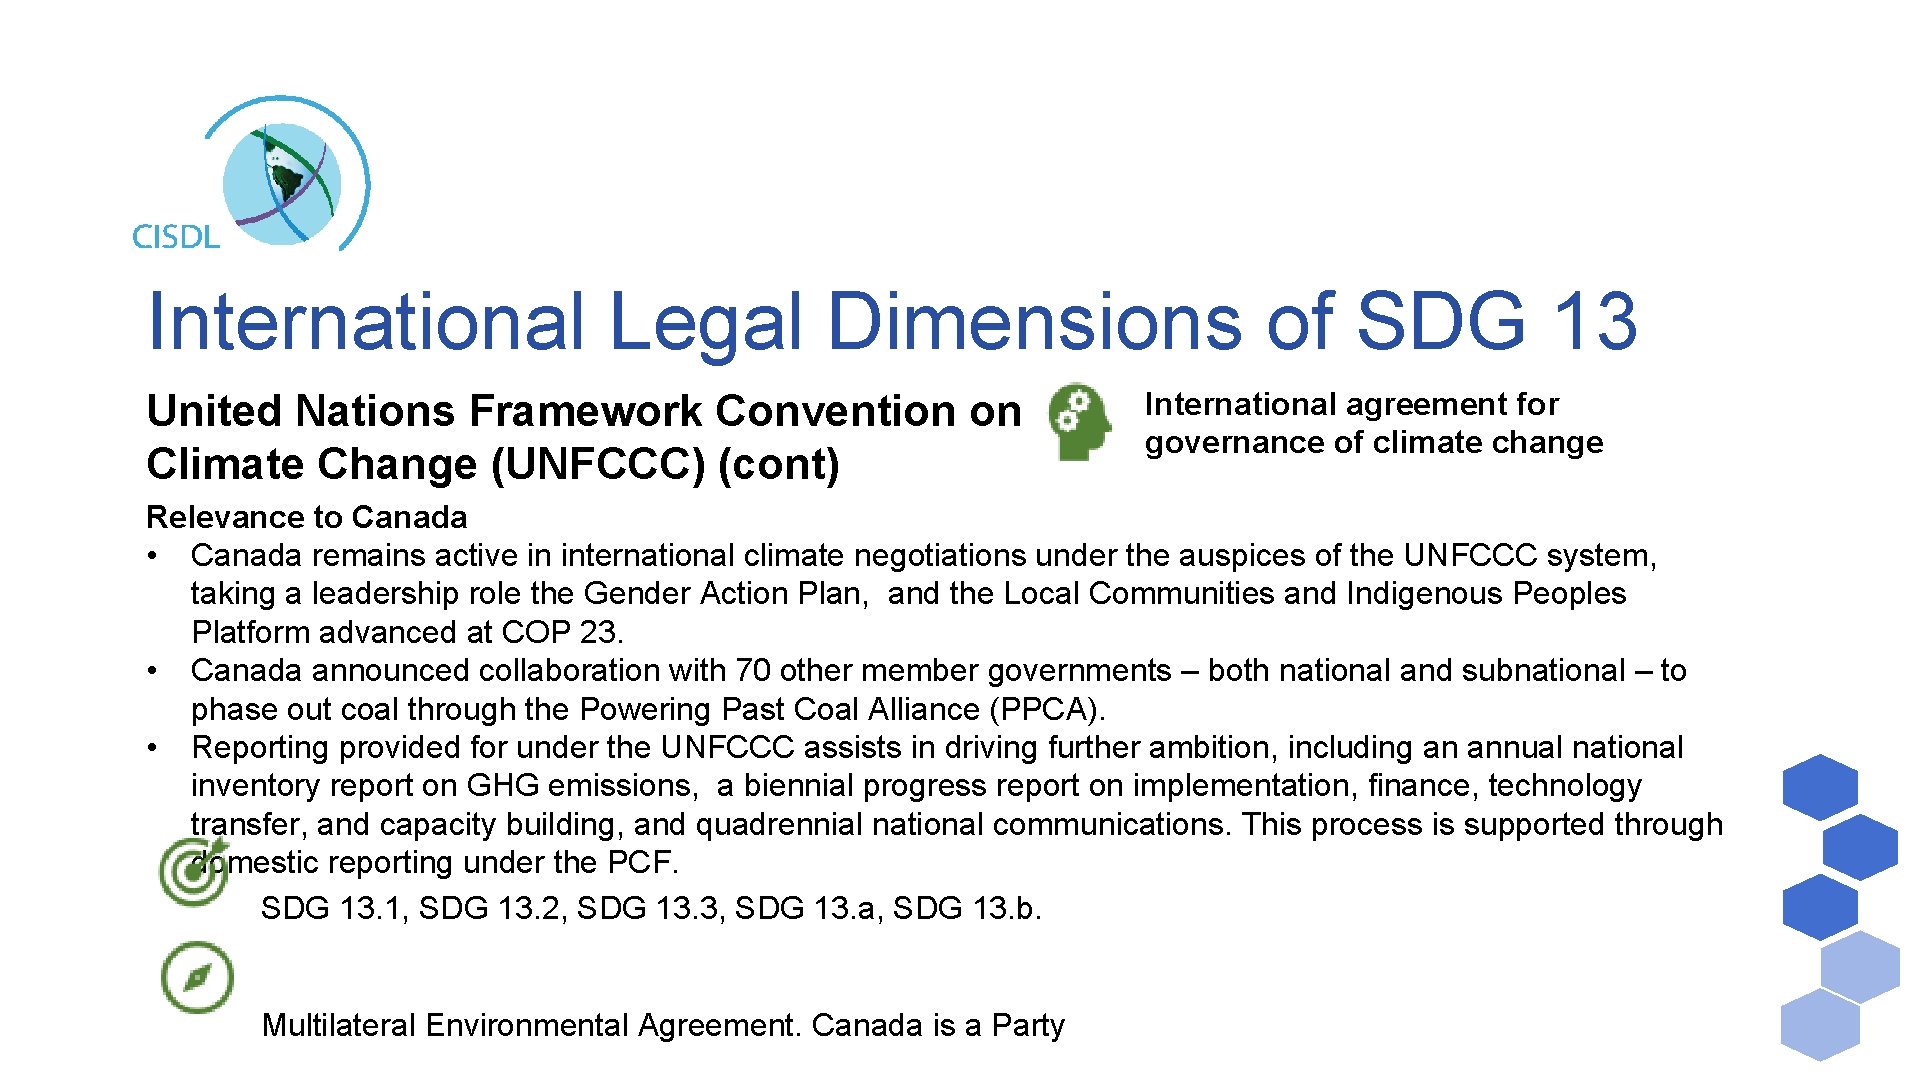 International Legal Dimensions of SDG 13 United Nations Framework Convention on Climate Change (UNFCCC)